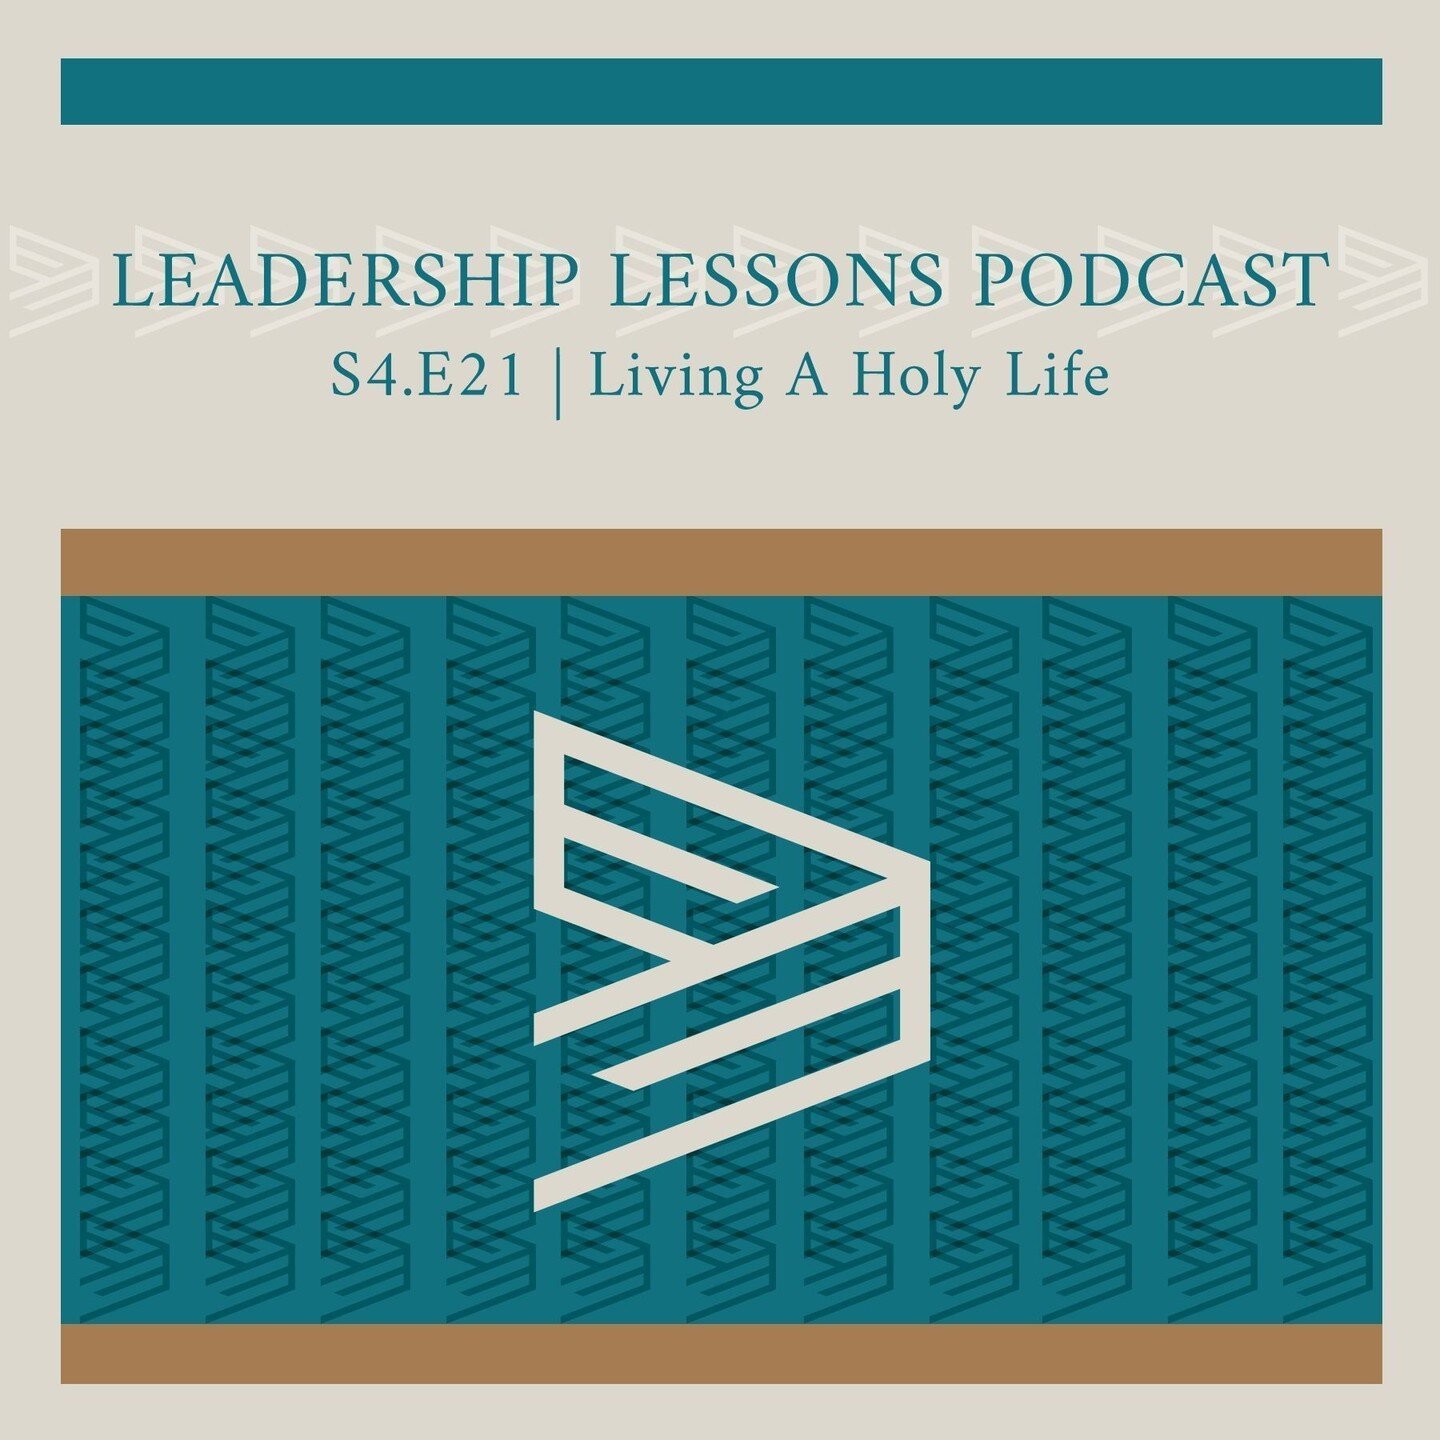 EE Leaders | Leadership Lessons Podcasts Season 4 Episode 21 - Living A Holy Life 
In this week&rsquo;s episode from Nehemiah 6:10-14, Pastor Daniel talks about the high calling of living a holy life&mdash;to resist sin&mdash;and why it is critical t